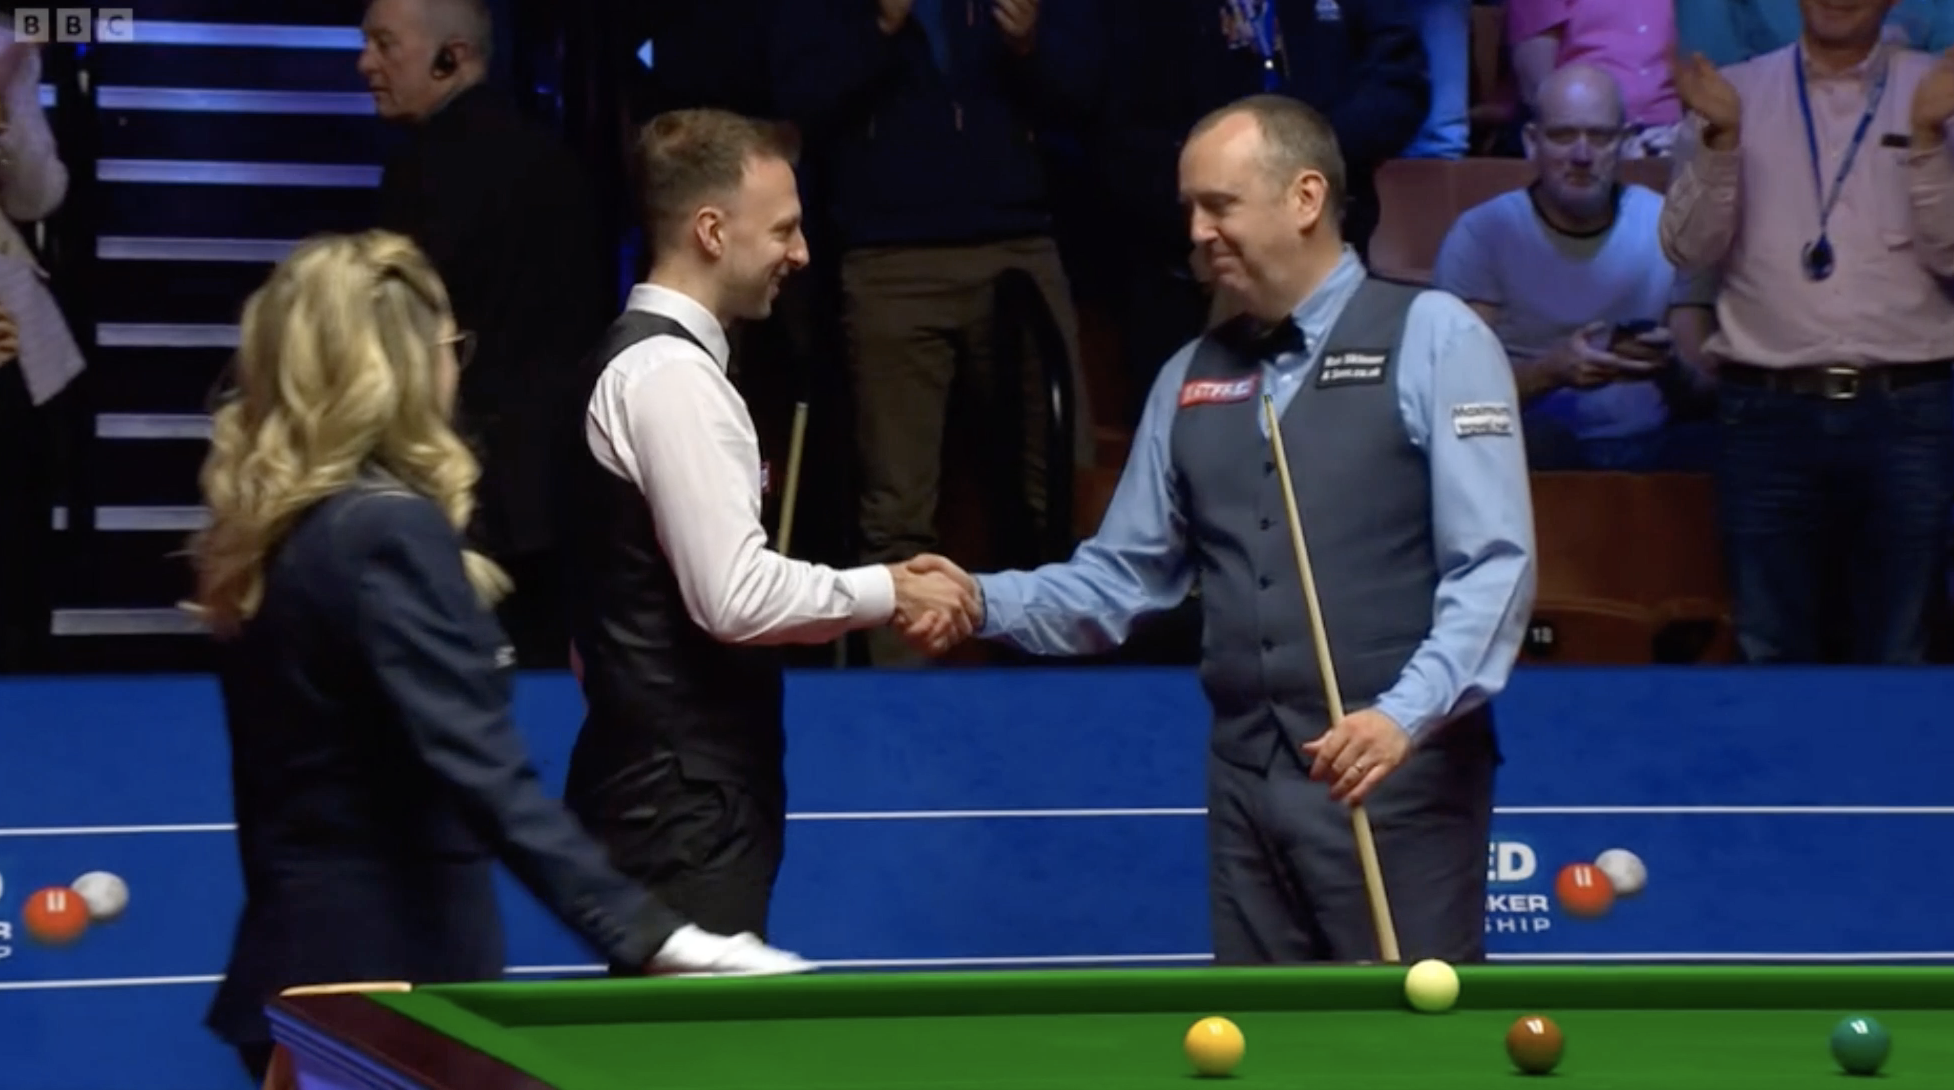 World Snooker results Mark Williams v Judd Trump latest news and frame scores from the Crucible